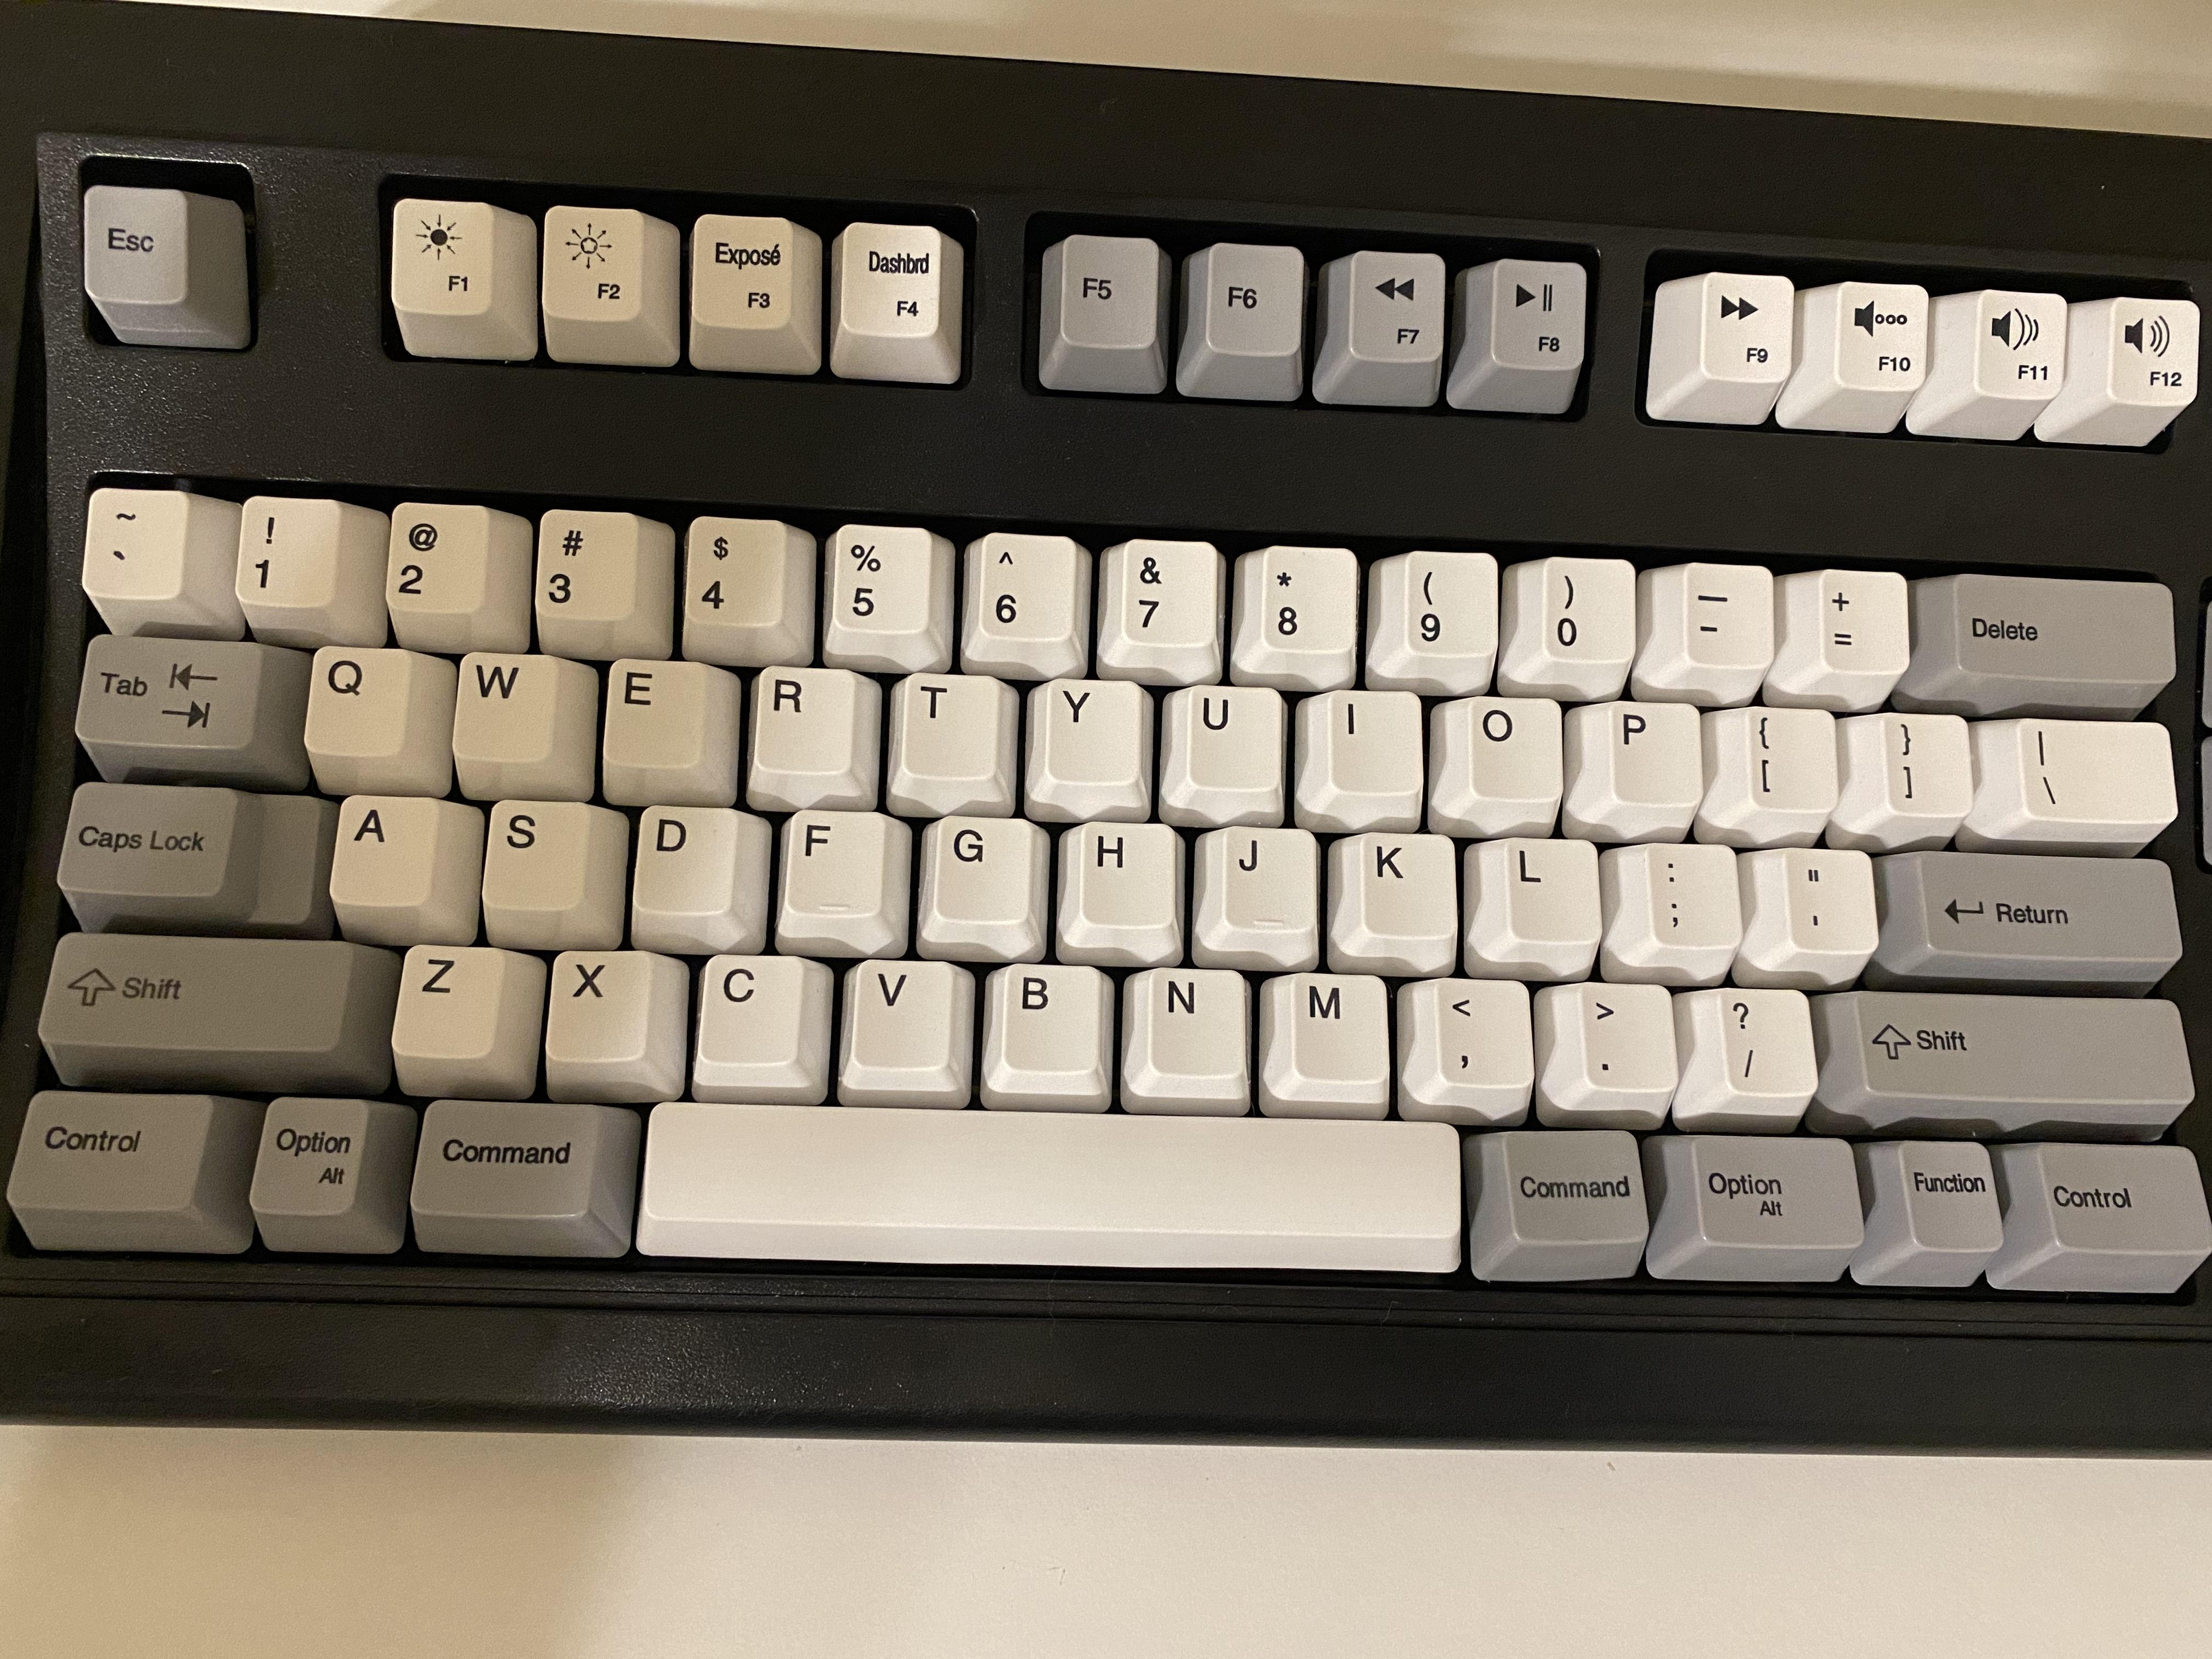 Unicomp New Model M with macOS layout